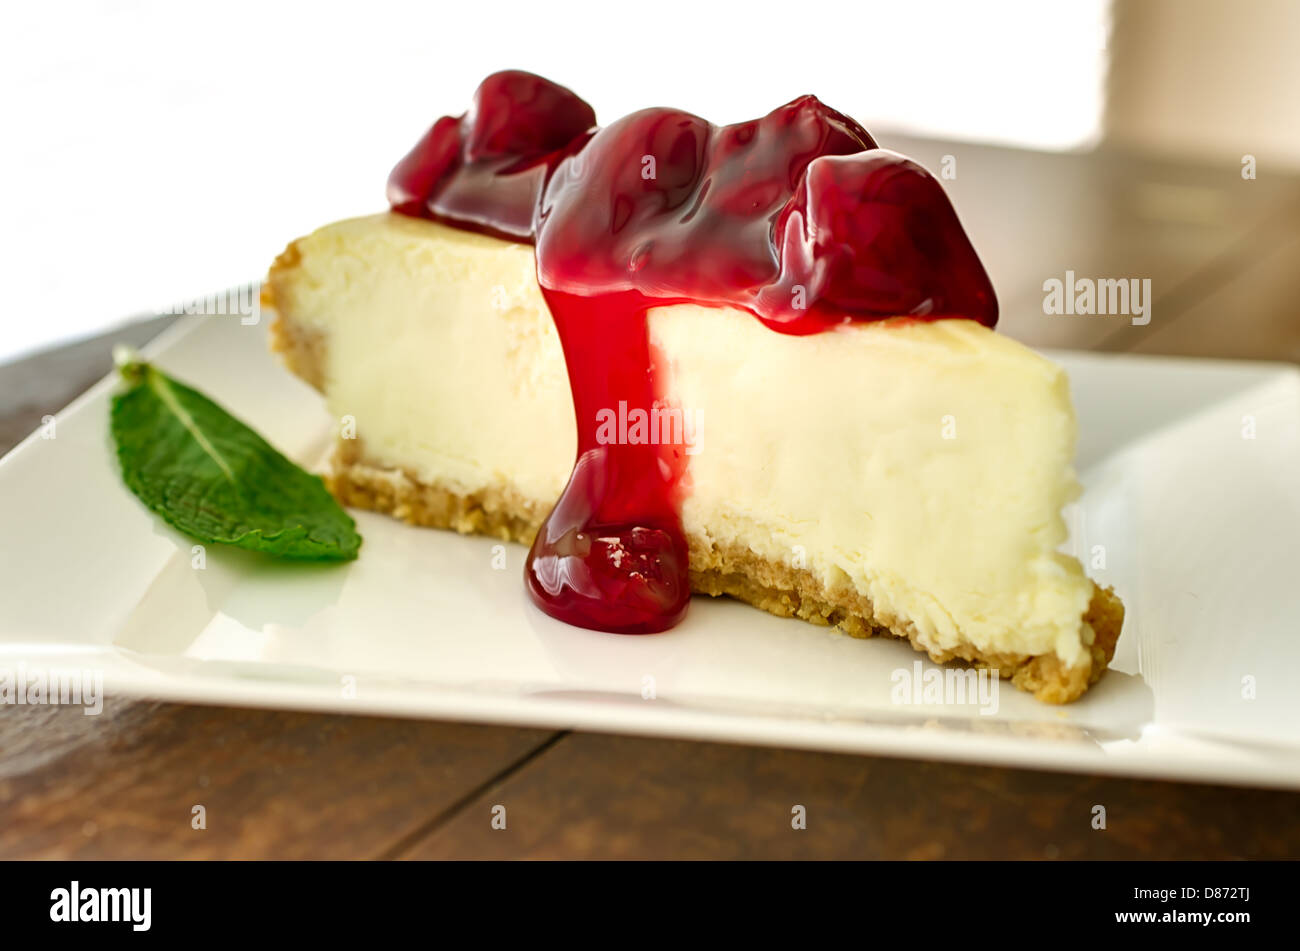 Slice of cherry cheesecake in the afternoon with mint garnish. Shallow depth of field. Stock Photo